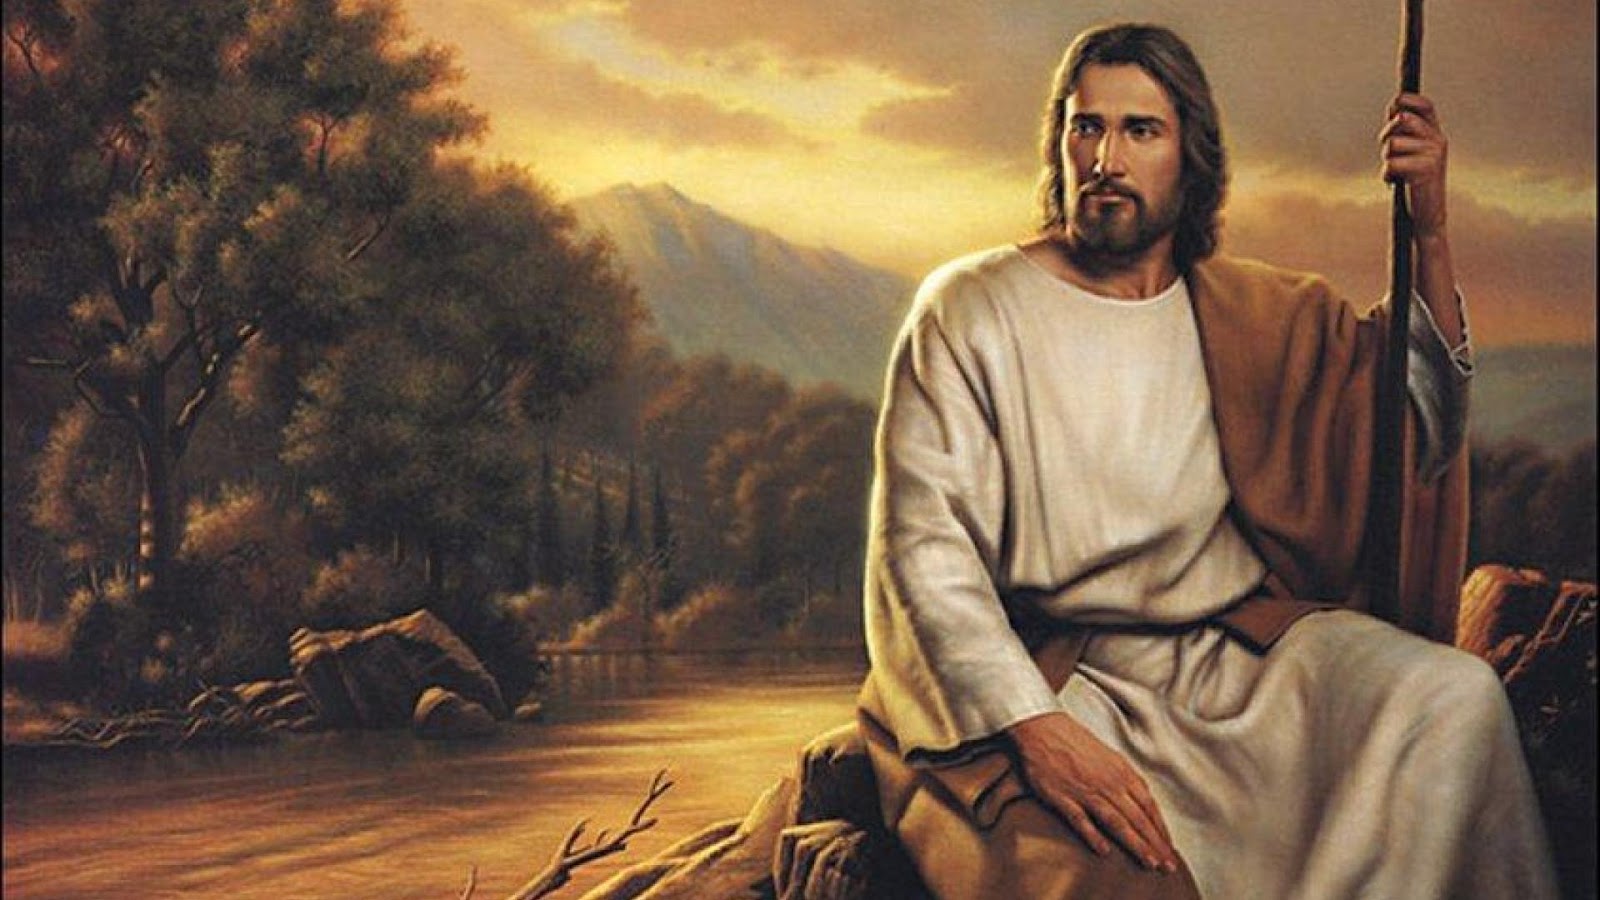 Wanna Know If You Have Enough General Knowledge? Take This Quiz to Find Out jesus